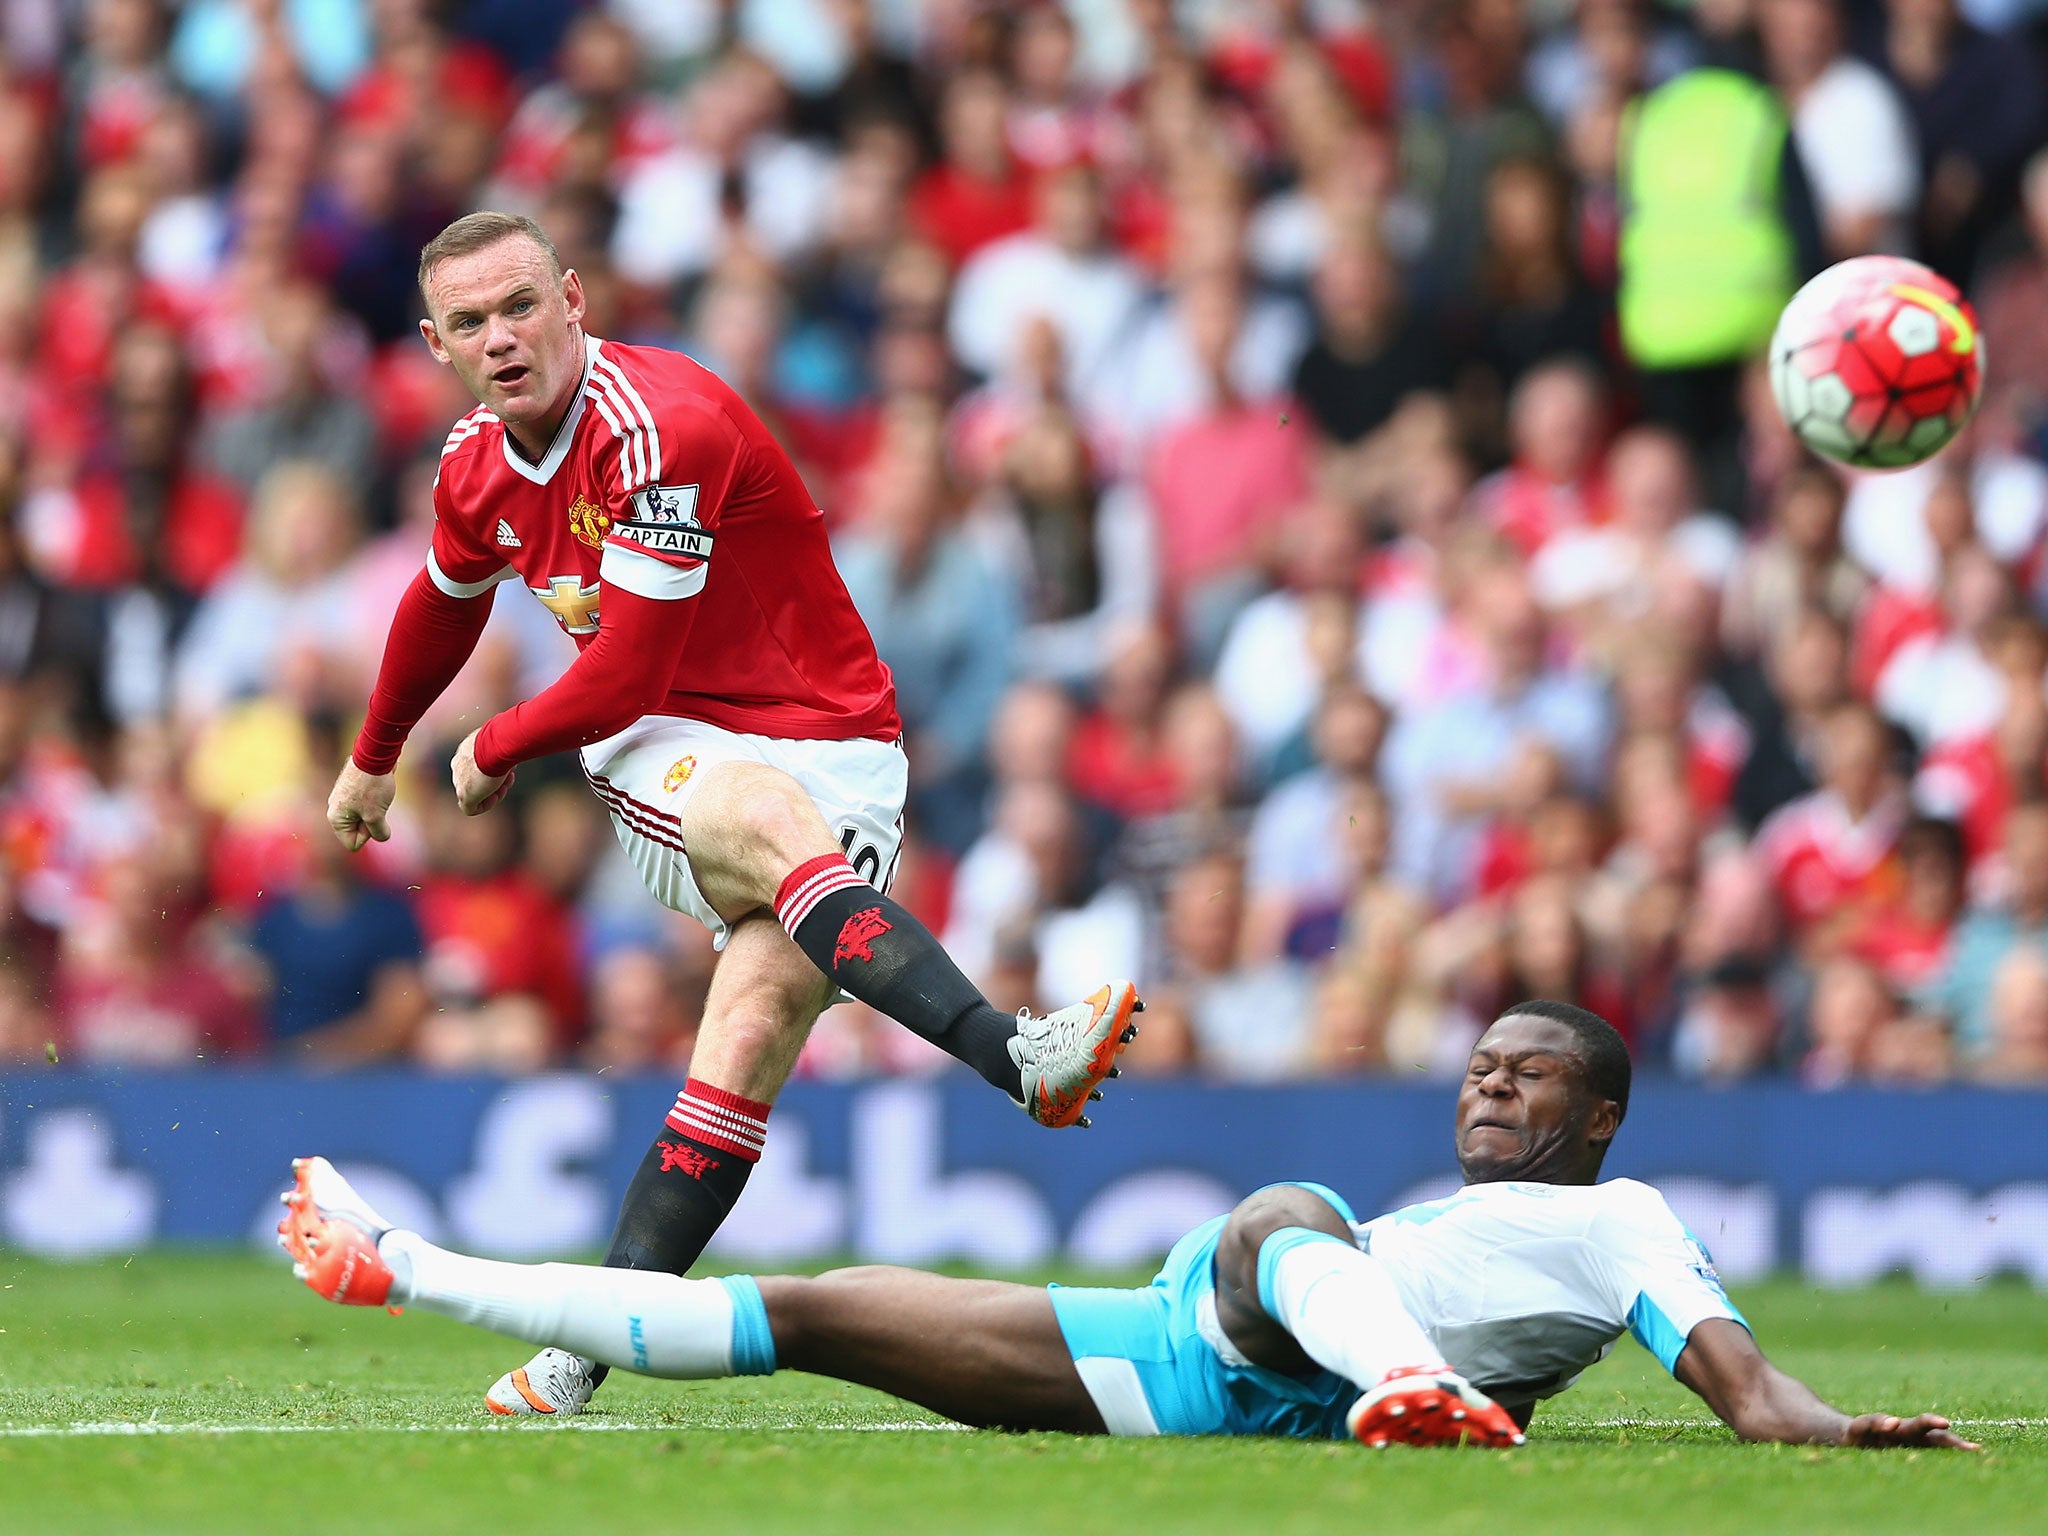 Wayne Rooney thought he scored the opener but it was ruled out for offside